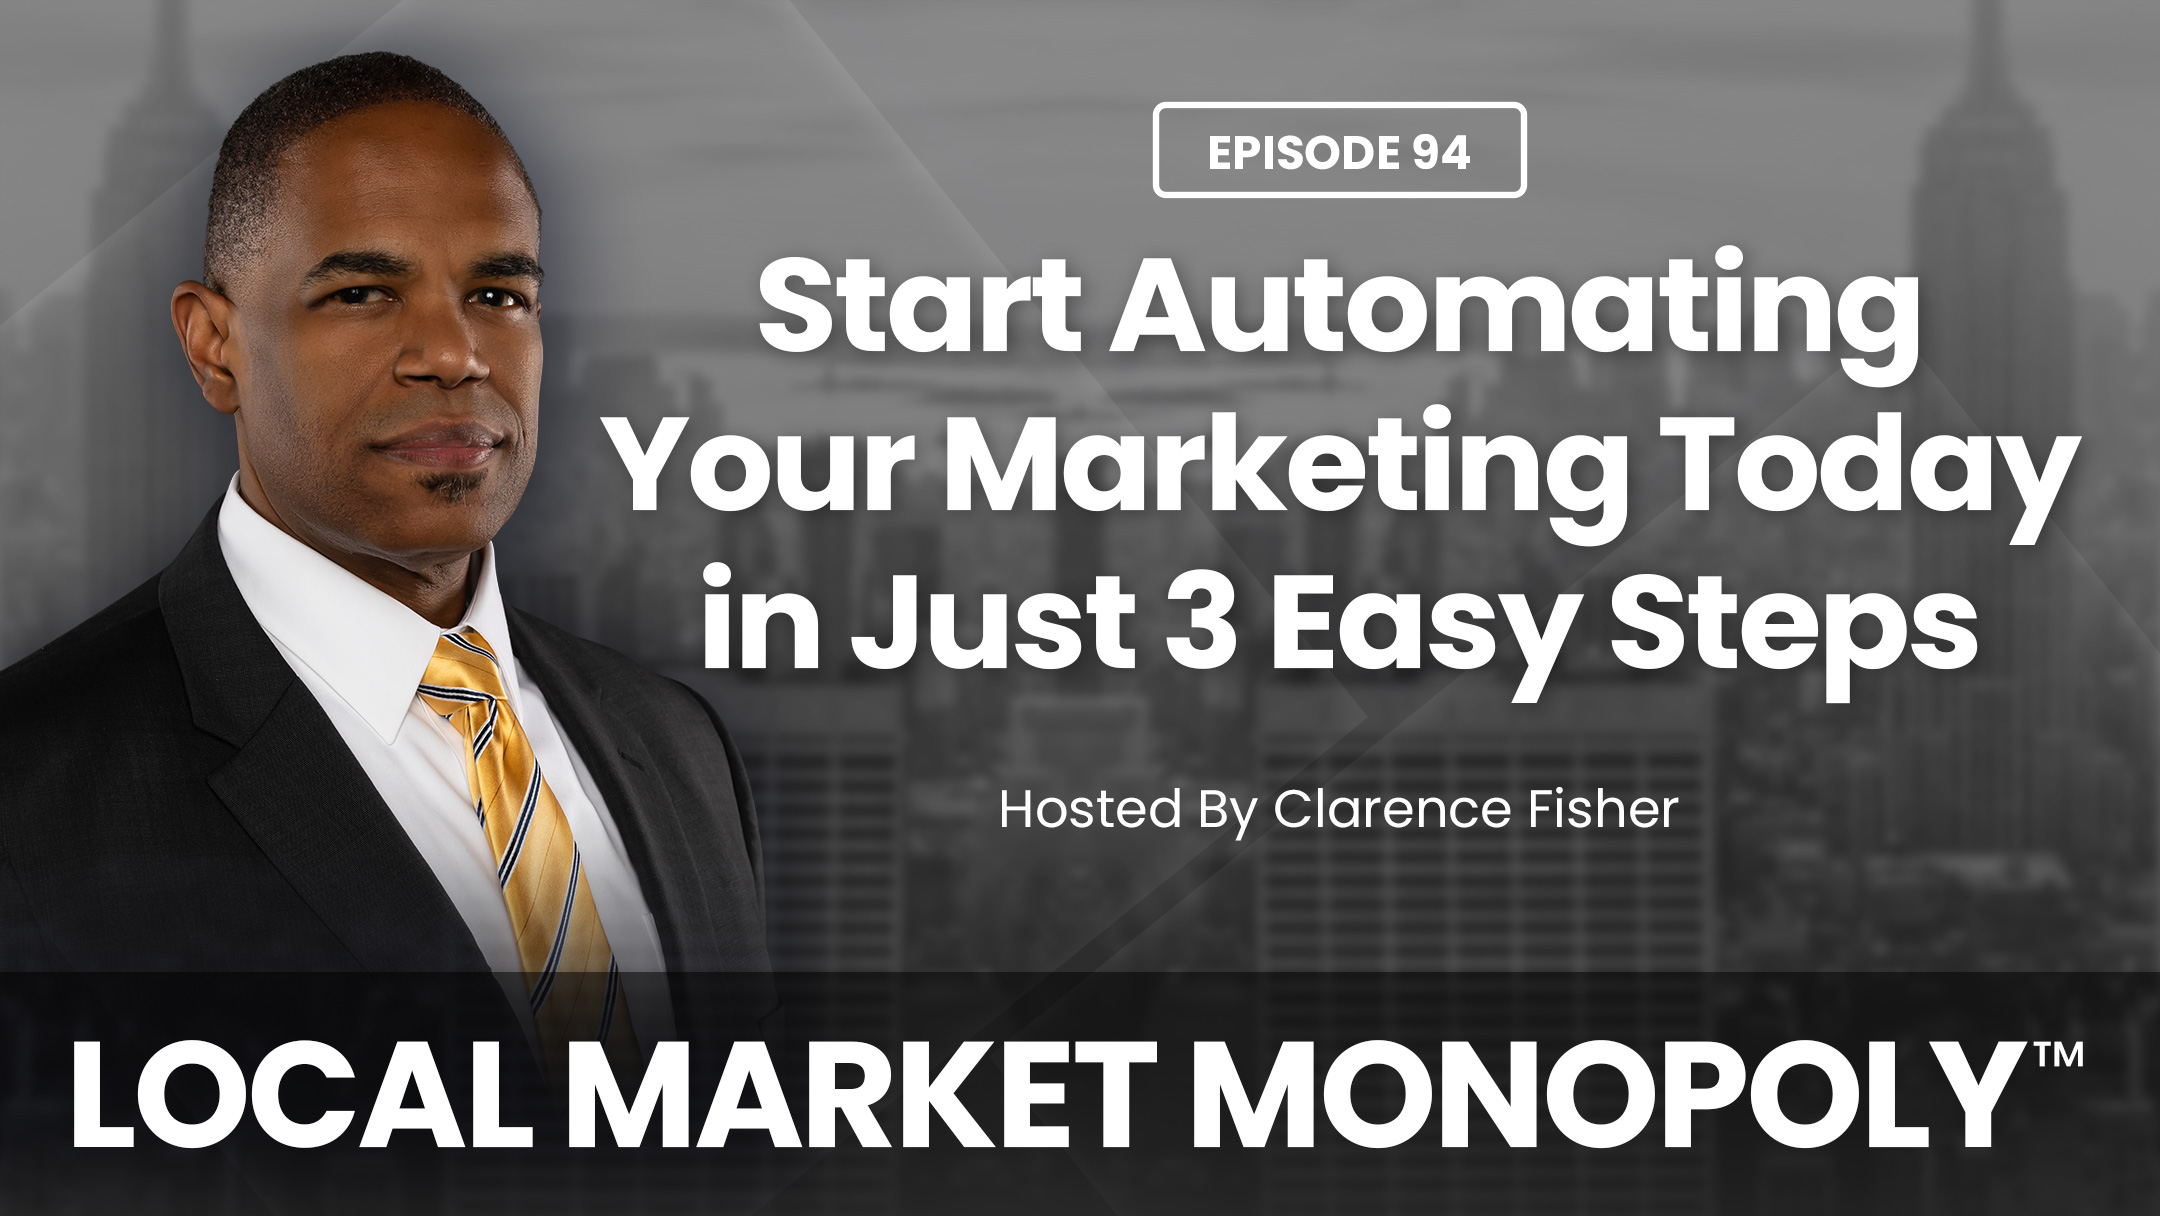 Start Automating Your Marketing Today in Just 3 Easy Steps